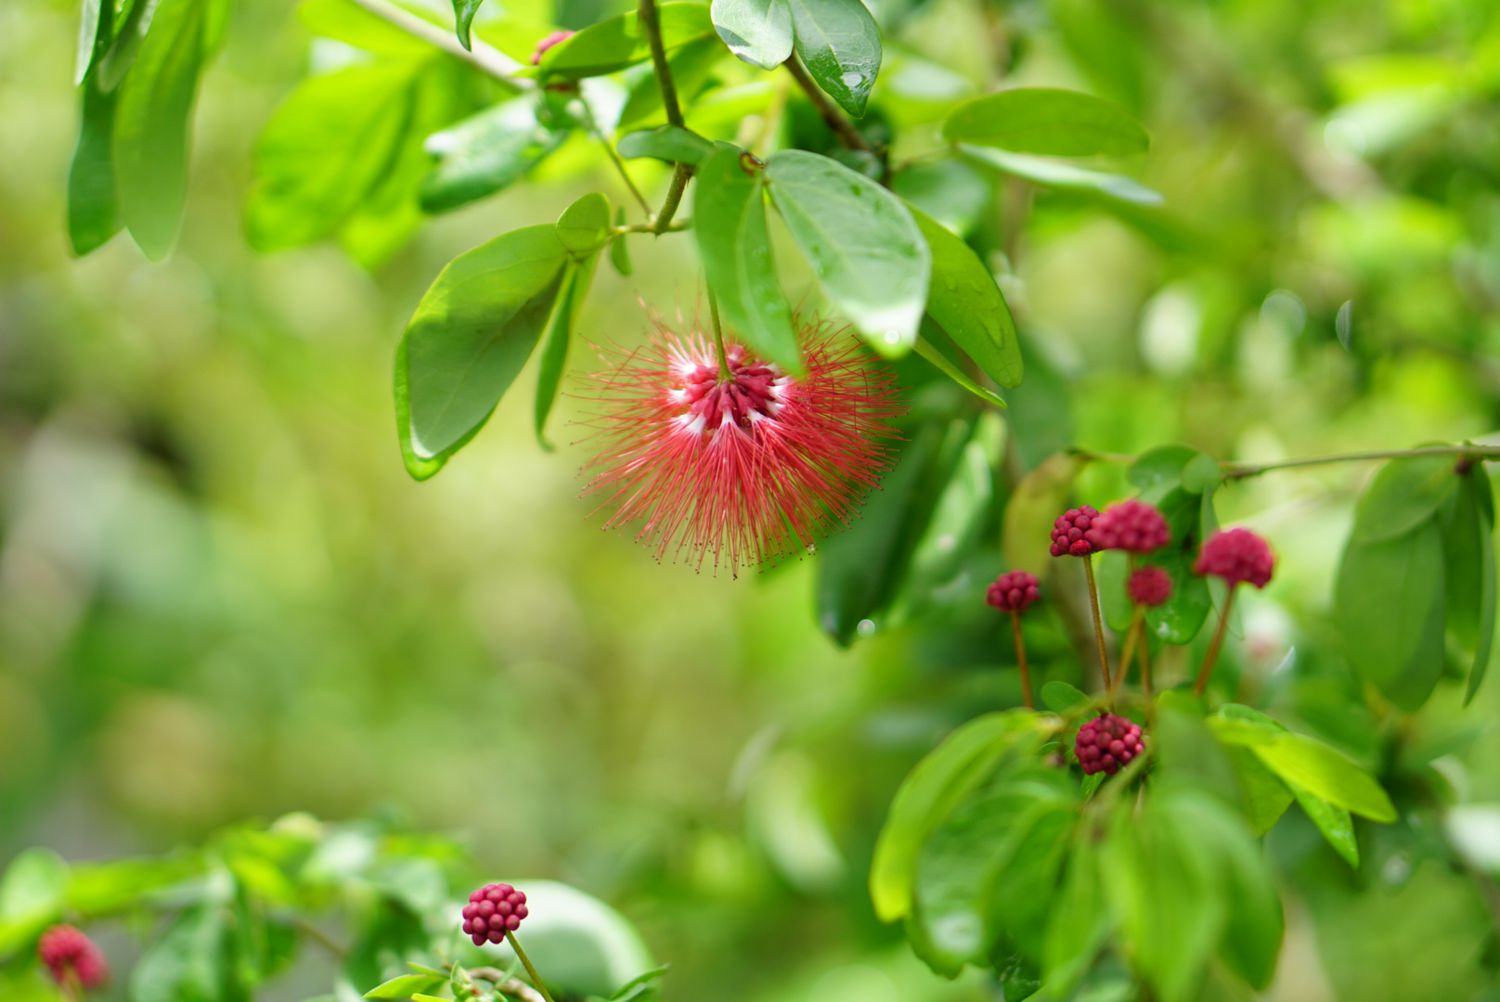 Fairy duster plant red feathery flower ball on end of branch with bright green leaves